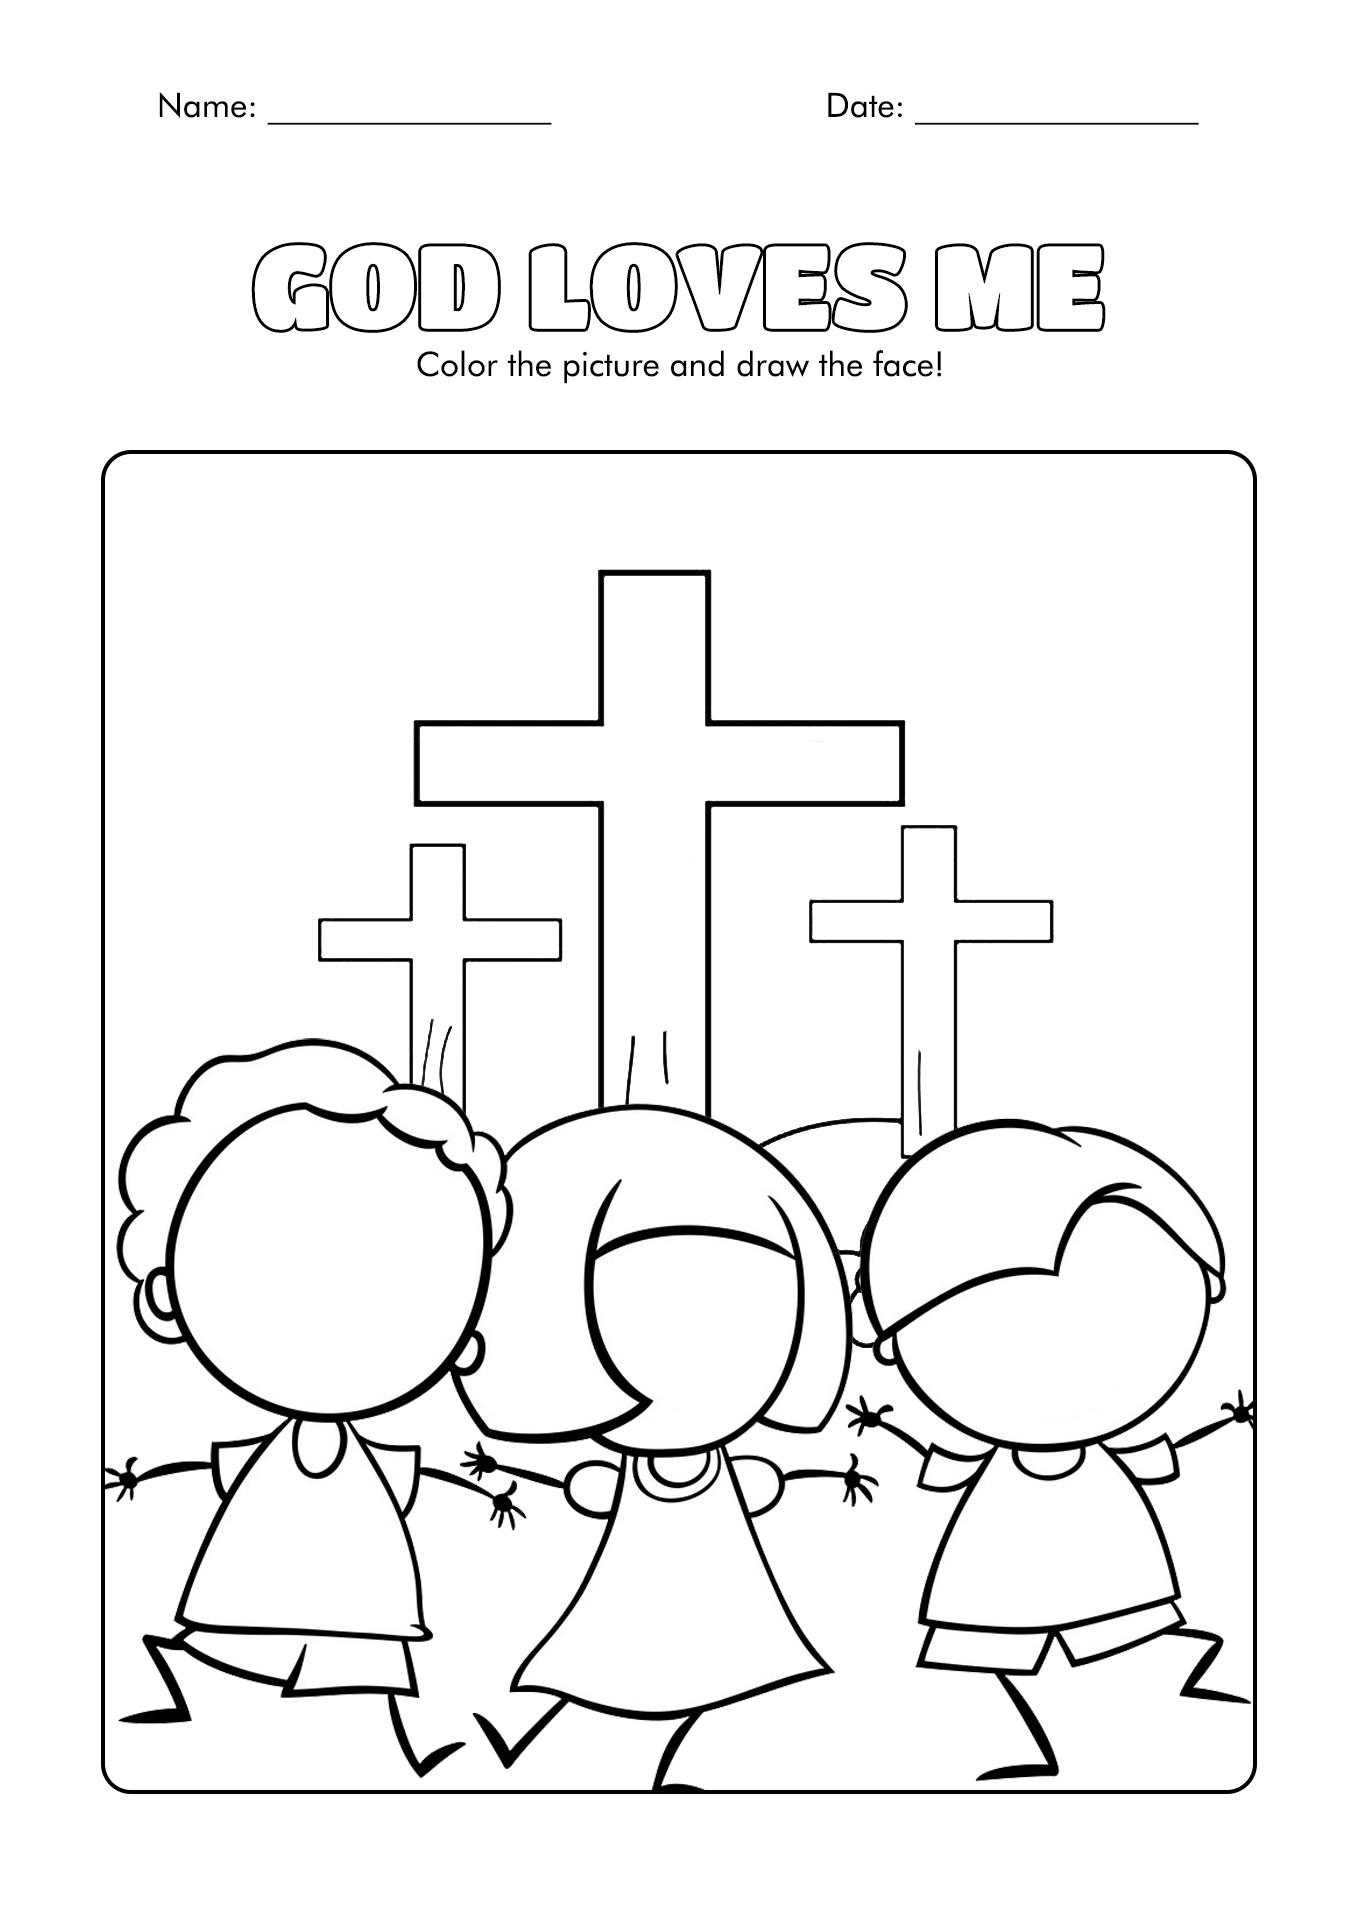 God Knows Me Coloring Page Image